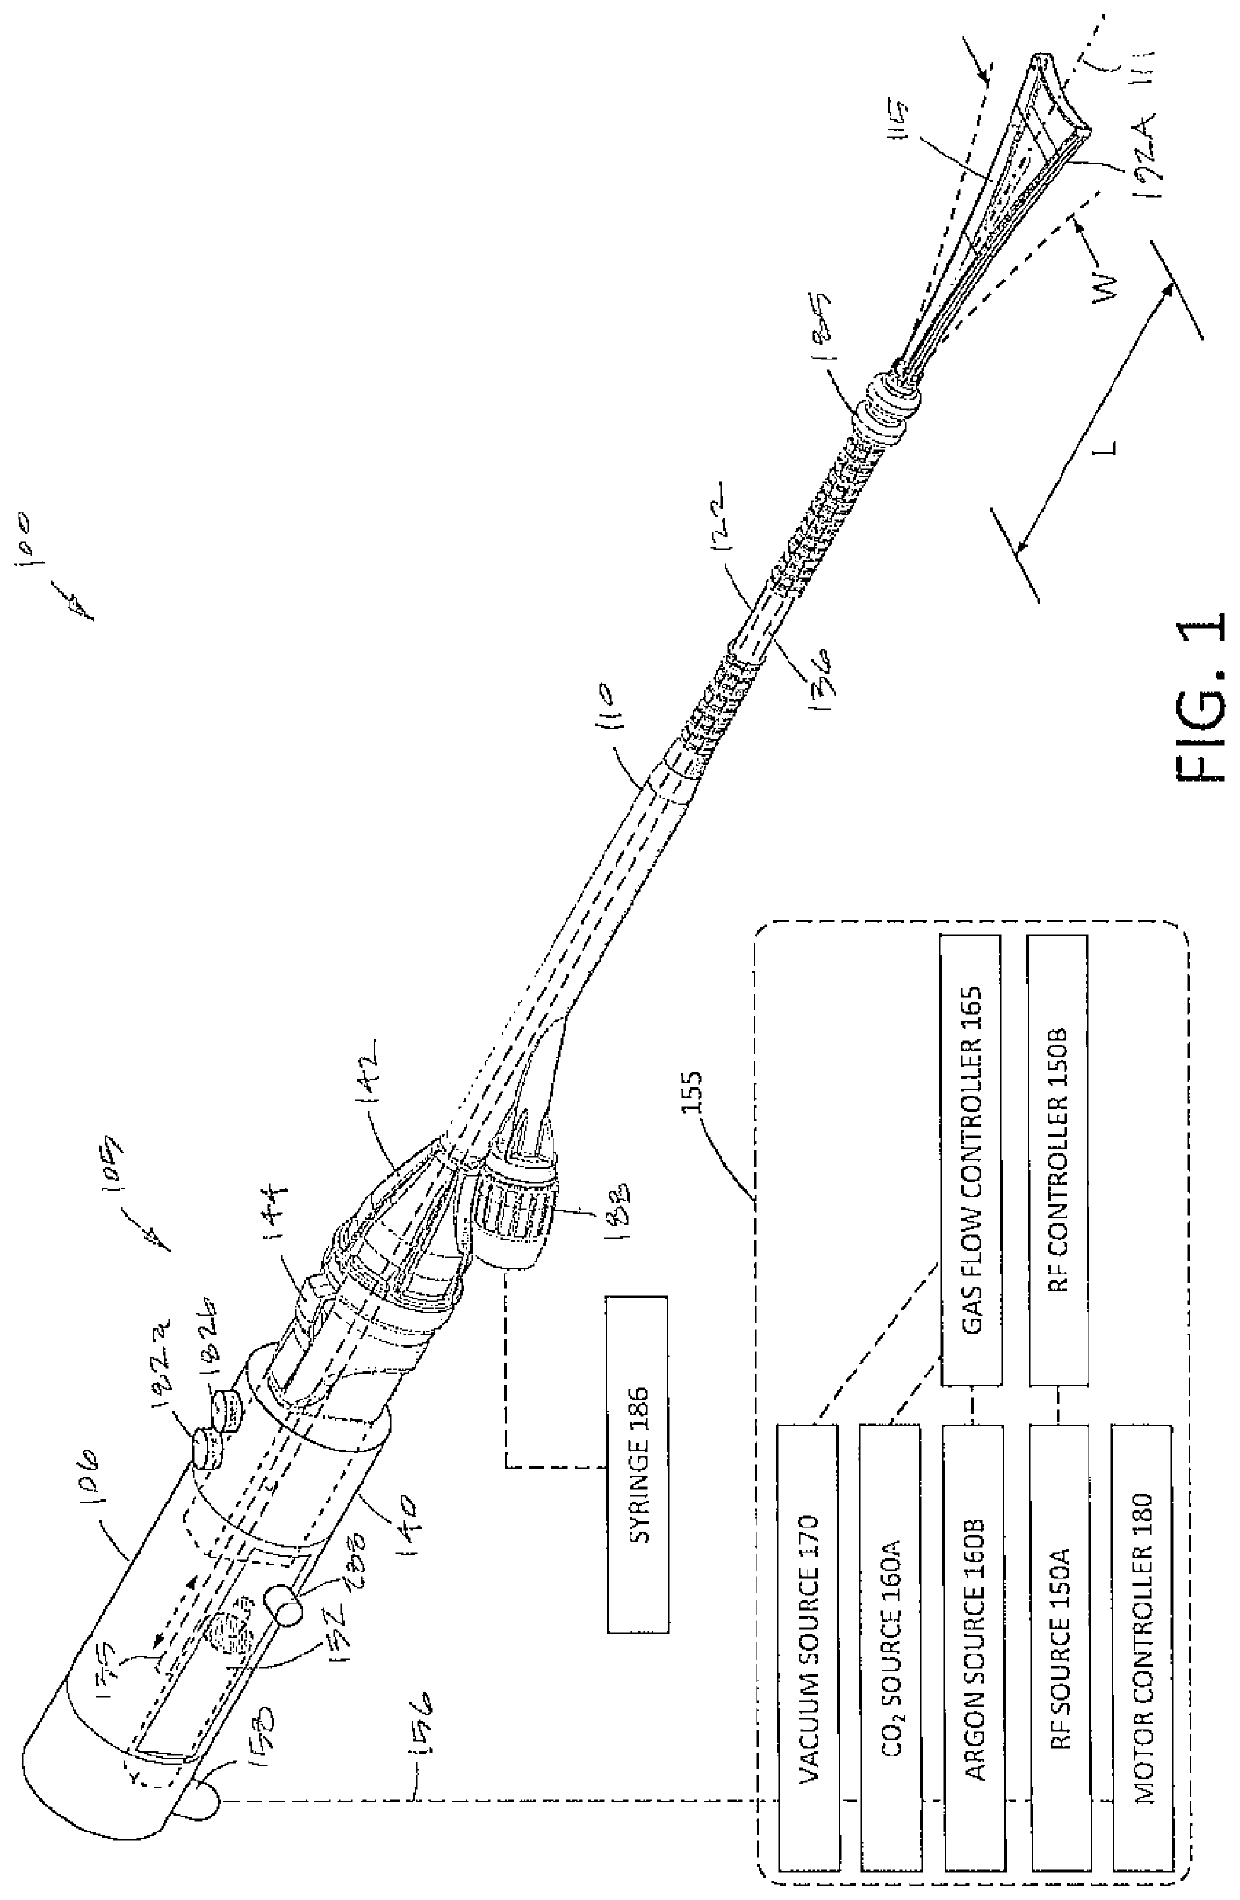 Systems and methods for evaluating the integrity of a uterine cavity